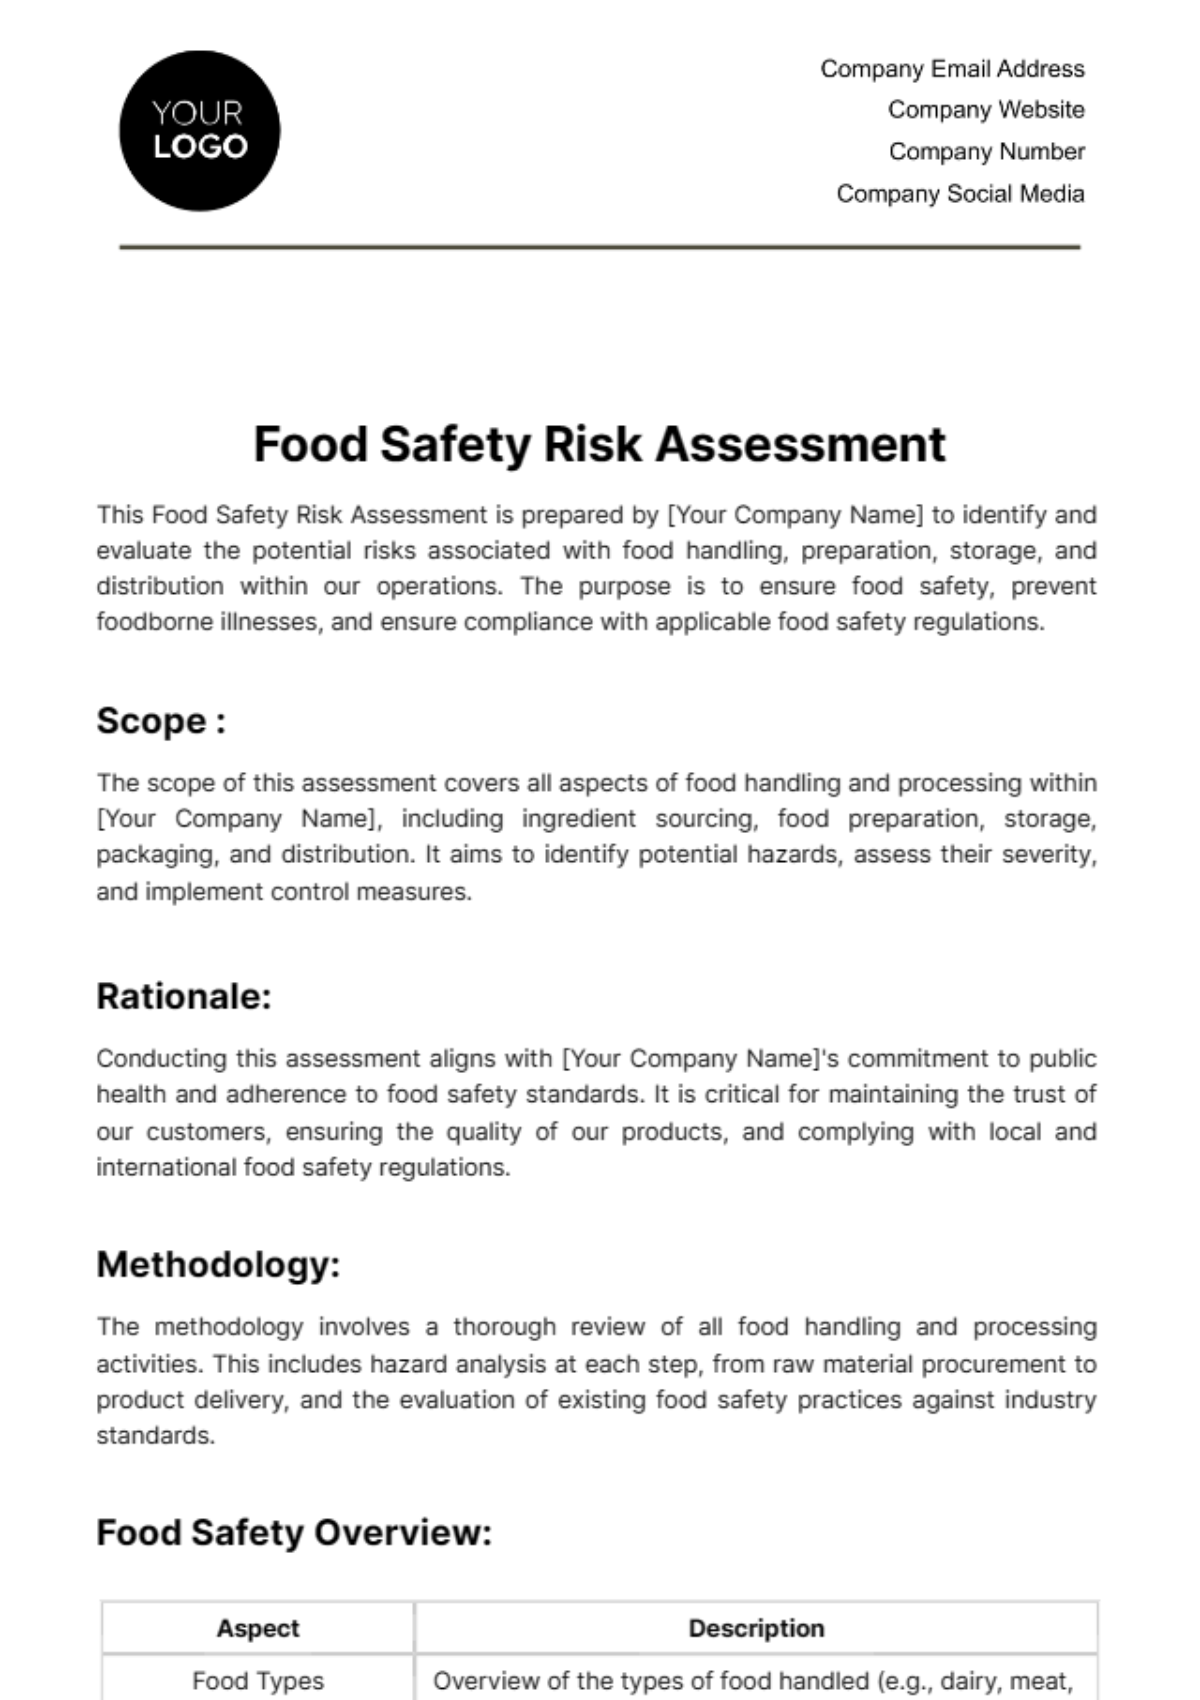 Food Safety Risk Assessment Template